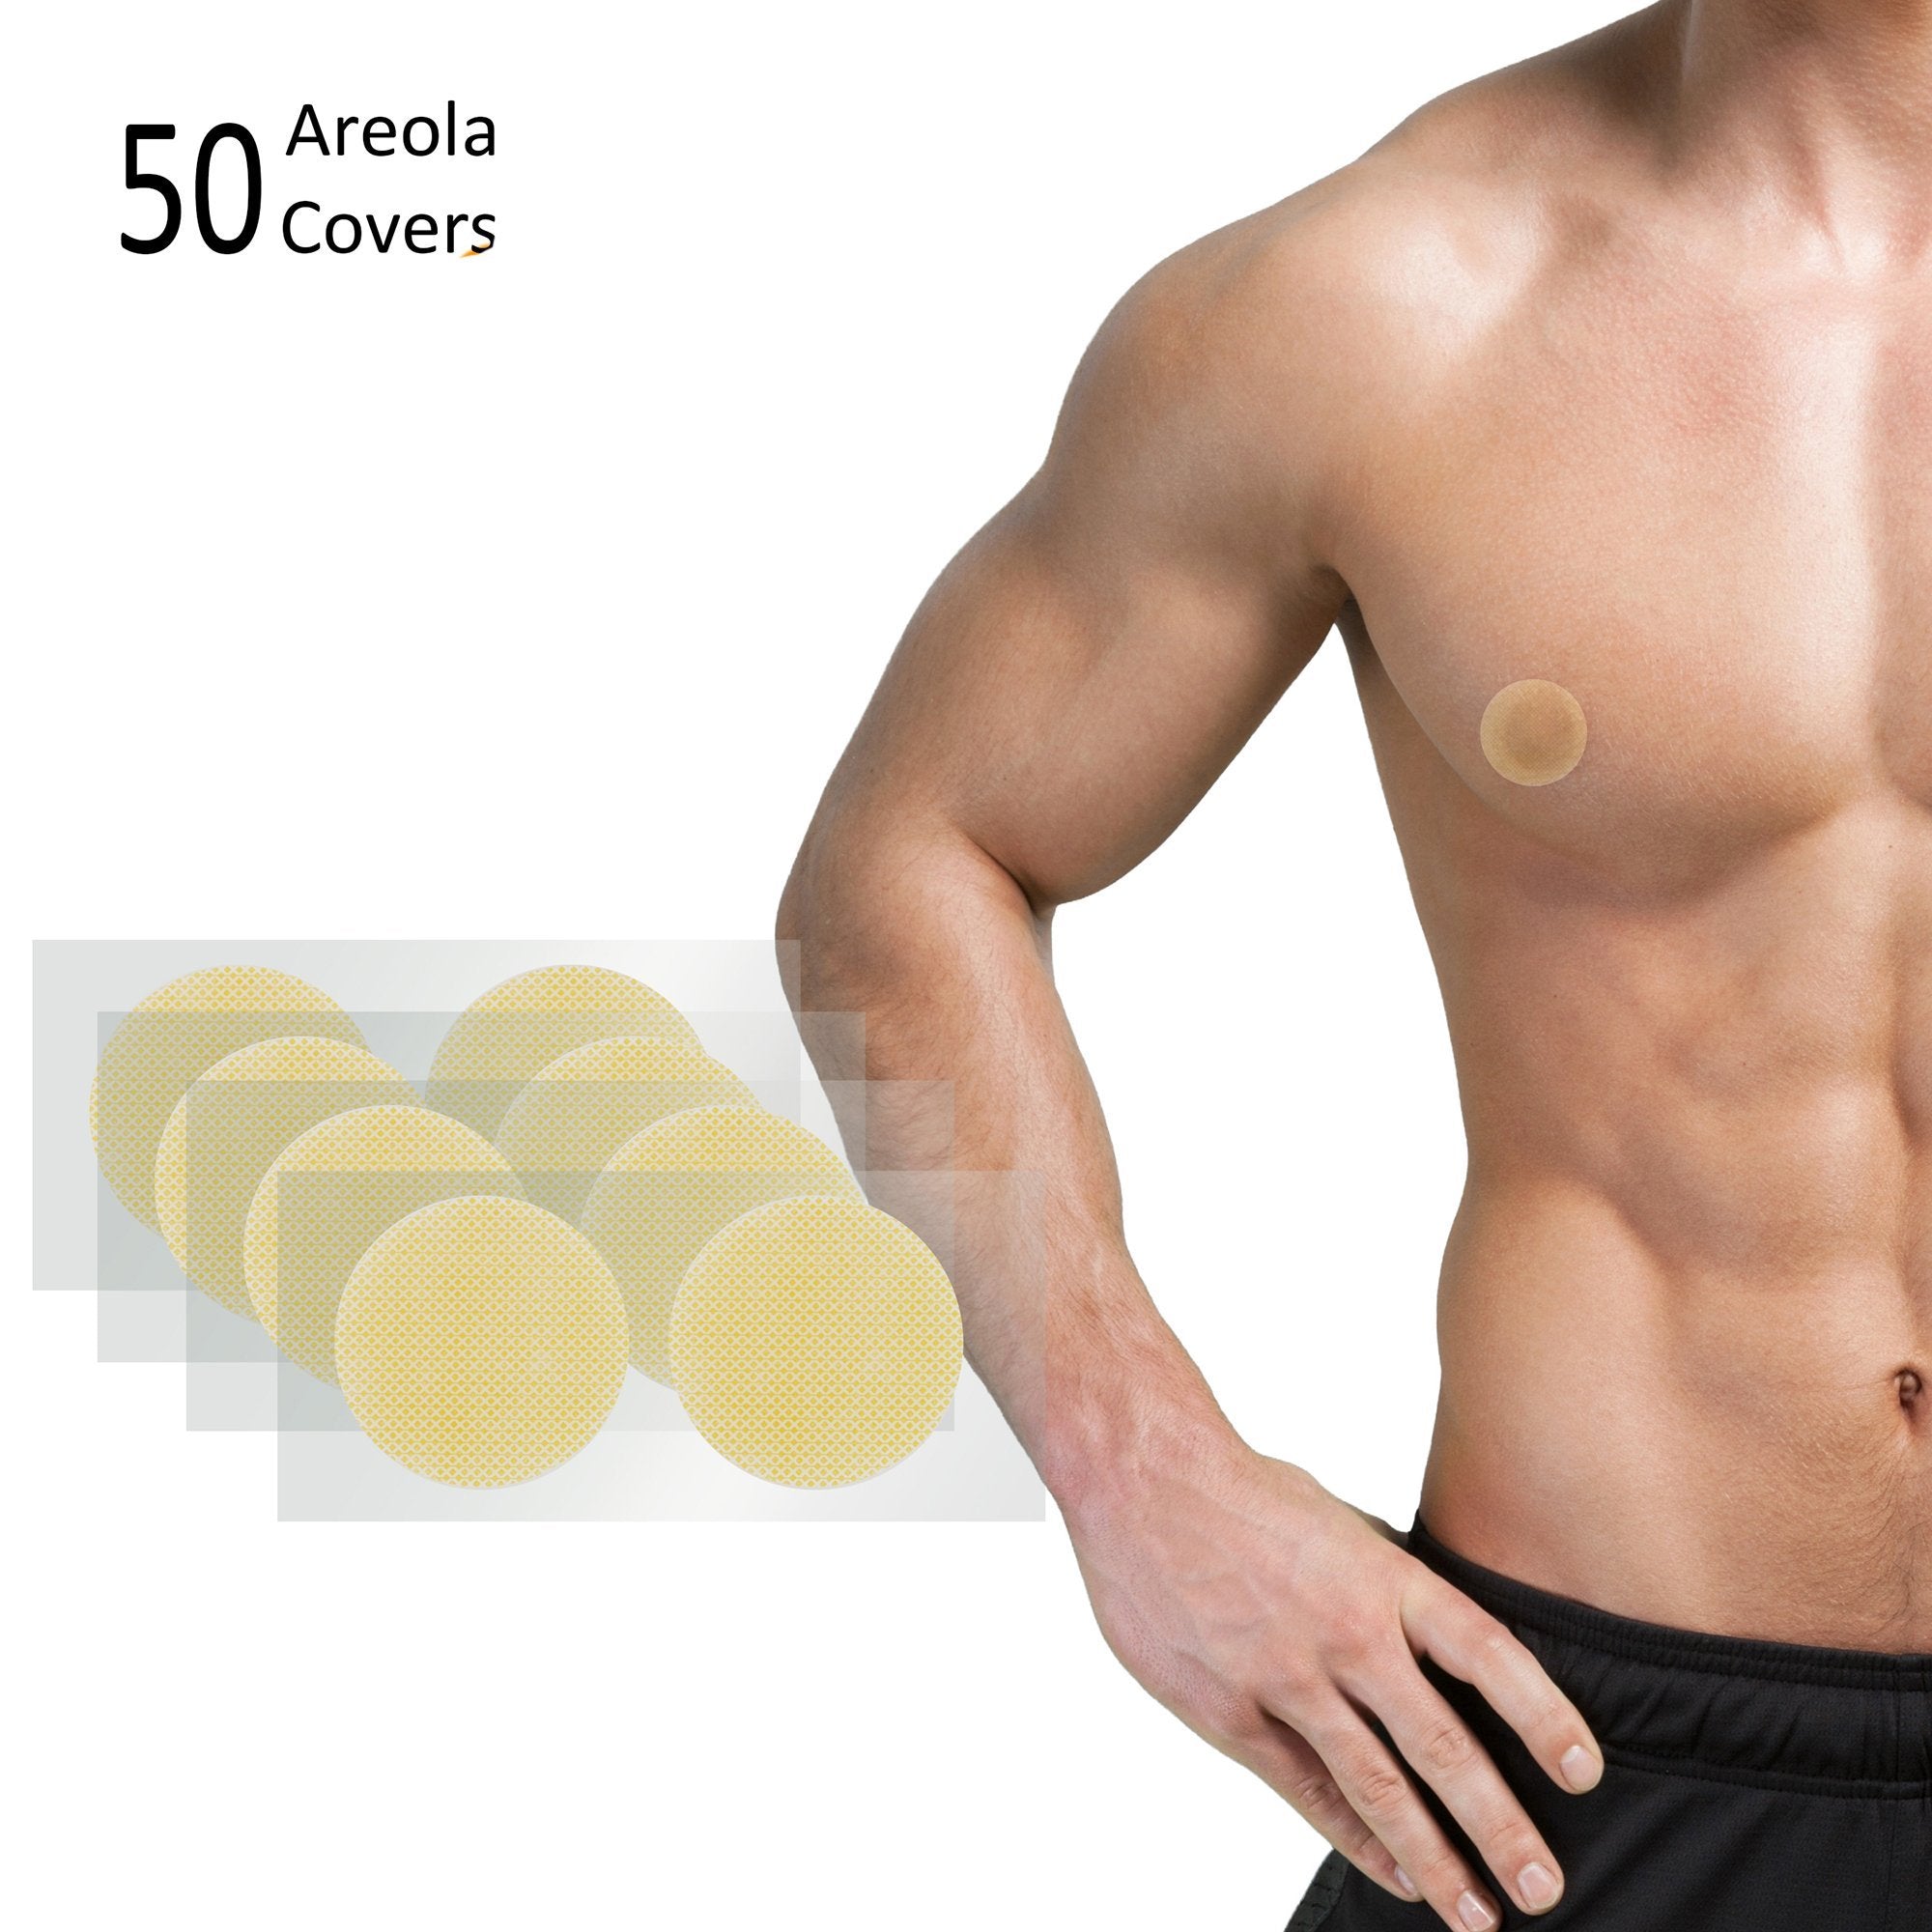  Confidence Bodywear - Nipple Cover For Men, Chest Binder  Alternative For Gynecomastia, Conceal Man Boobs, Breast Tape, Boob Tape,  Nipple Cream, Body Shaper Shapewear, Pack of 50 (Normal - 1.38) 